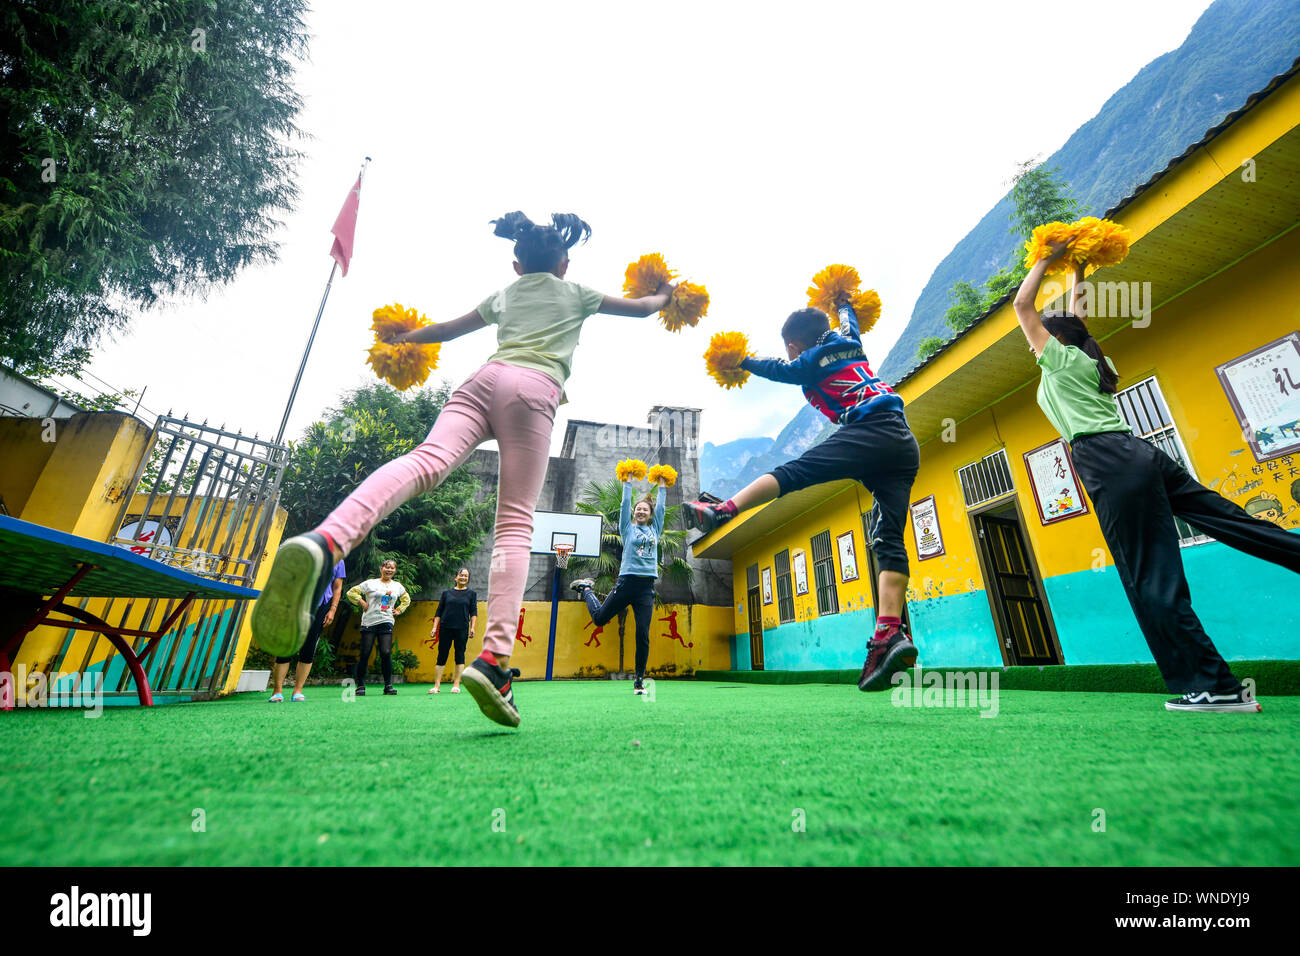 (190906) -- CHONGQING, Sept. 6, 2019 (Xinhua) -- Volunteer teacher Mu Yi (3rd R) teaches students aerobics at Lianhua Primary School of Luzi Village, Chengkou County, southwest China's Chongqing Municipality, Sept. 3, 2019. Mu Yi, a 25-year-old PE teacher from Chongqing Municipality, offers a week-long volunteer teaching service and works with a local teacher Tao Yao in this remote village. In the school where only two second-grade students and 18 preschool children study, Mu Yi and Tao Yao also do other jobs as principals, cleaners, cooks and repairwomen. Mu Yi teaches children sports, art an Stock Photo